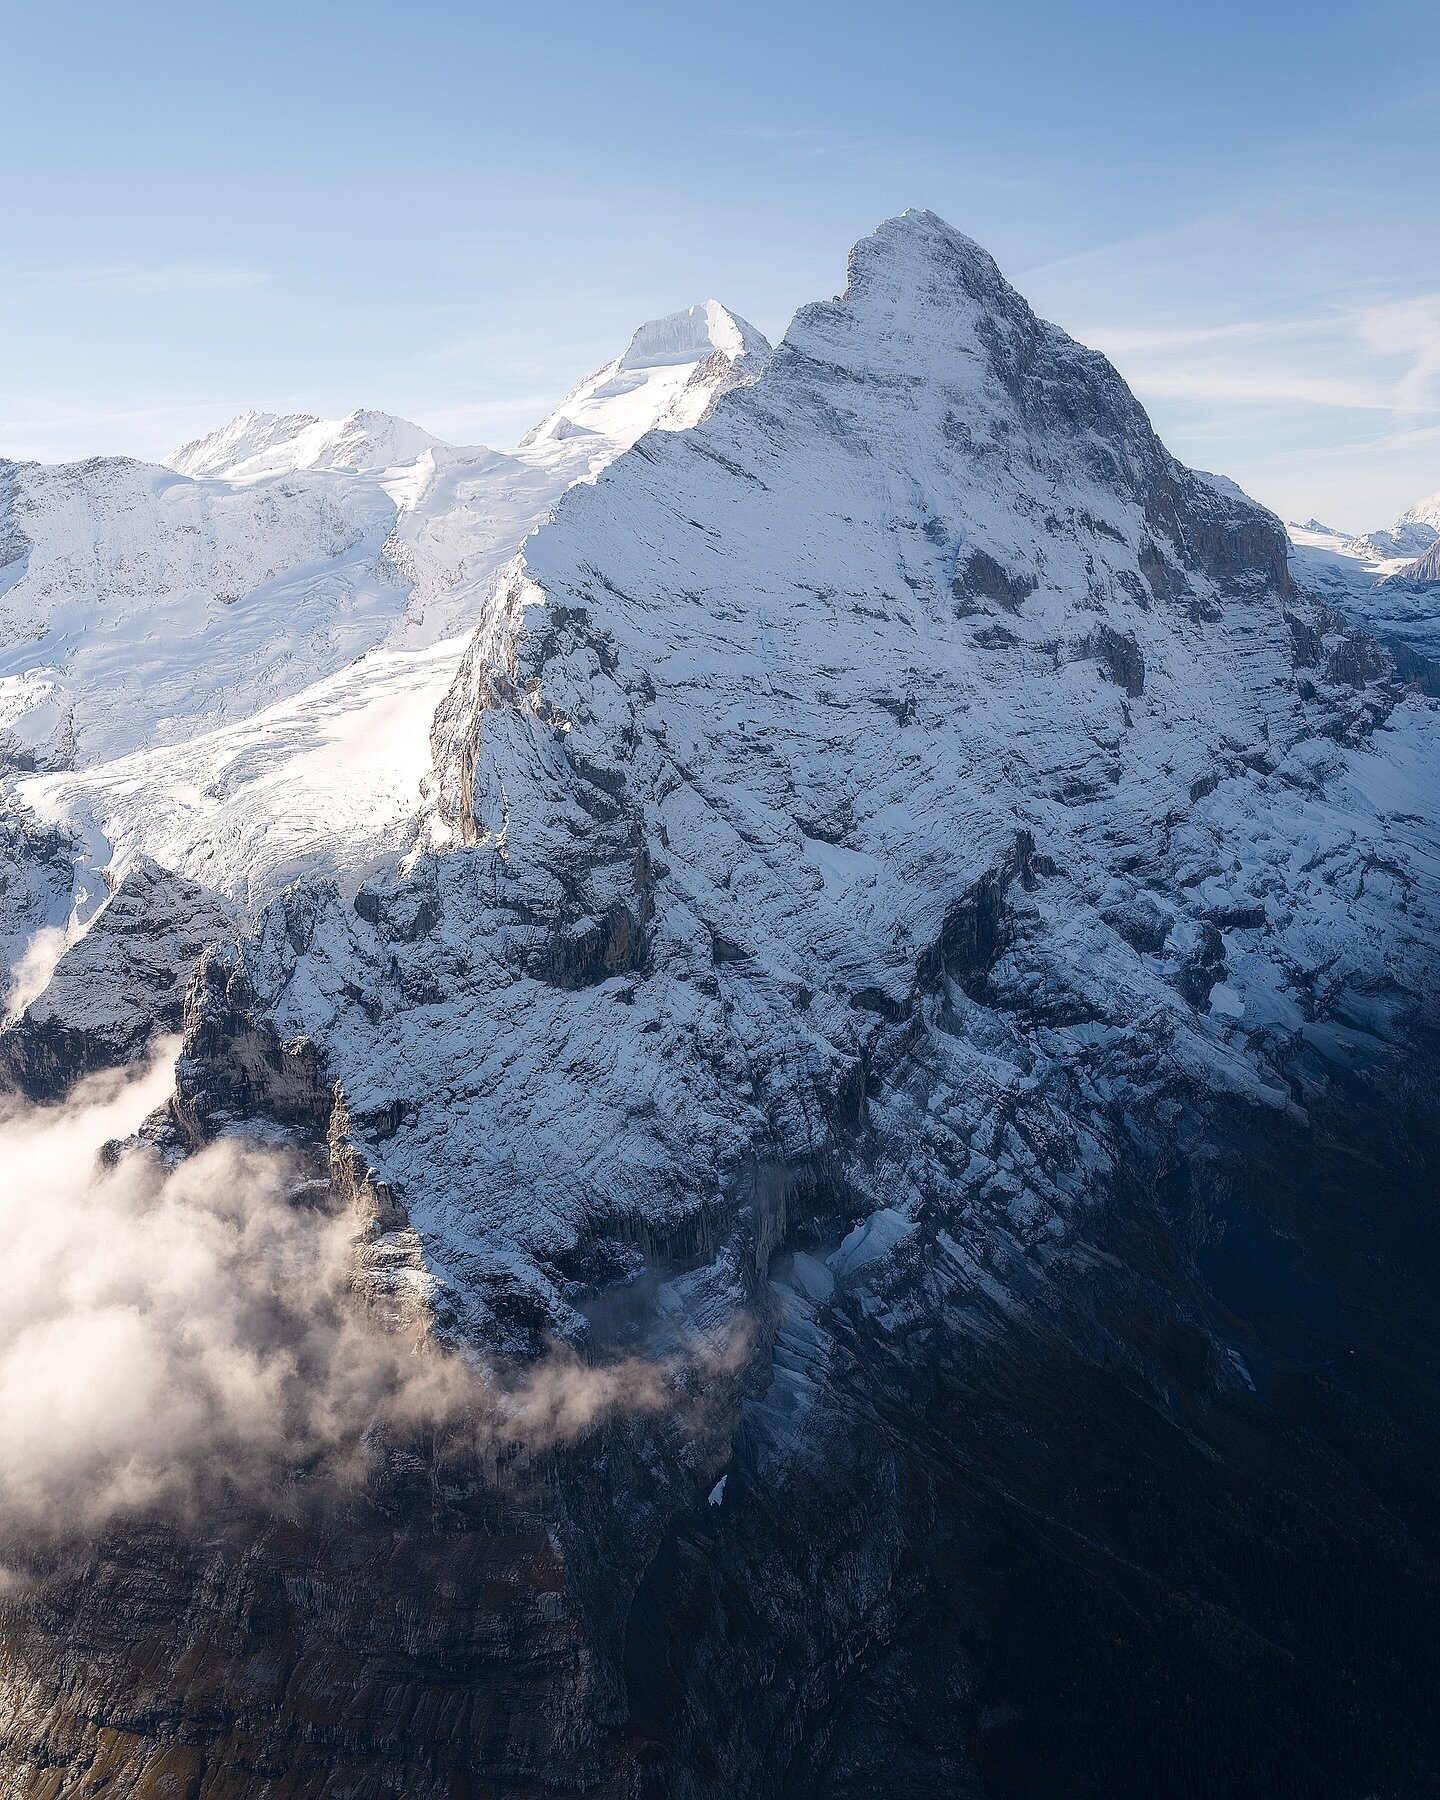 Eiger North Face 🏔️

The north face of a mountain is often more challenging to climb due to factors such as increased exposure to harsh weather conditions, greater ice and snow accumulation, and steeper terrain. 

The northern slopes receive less su